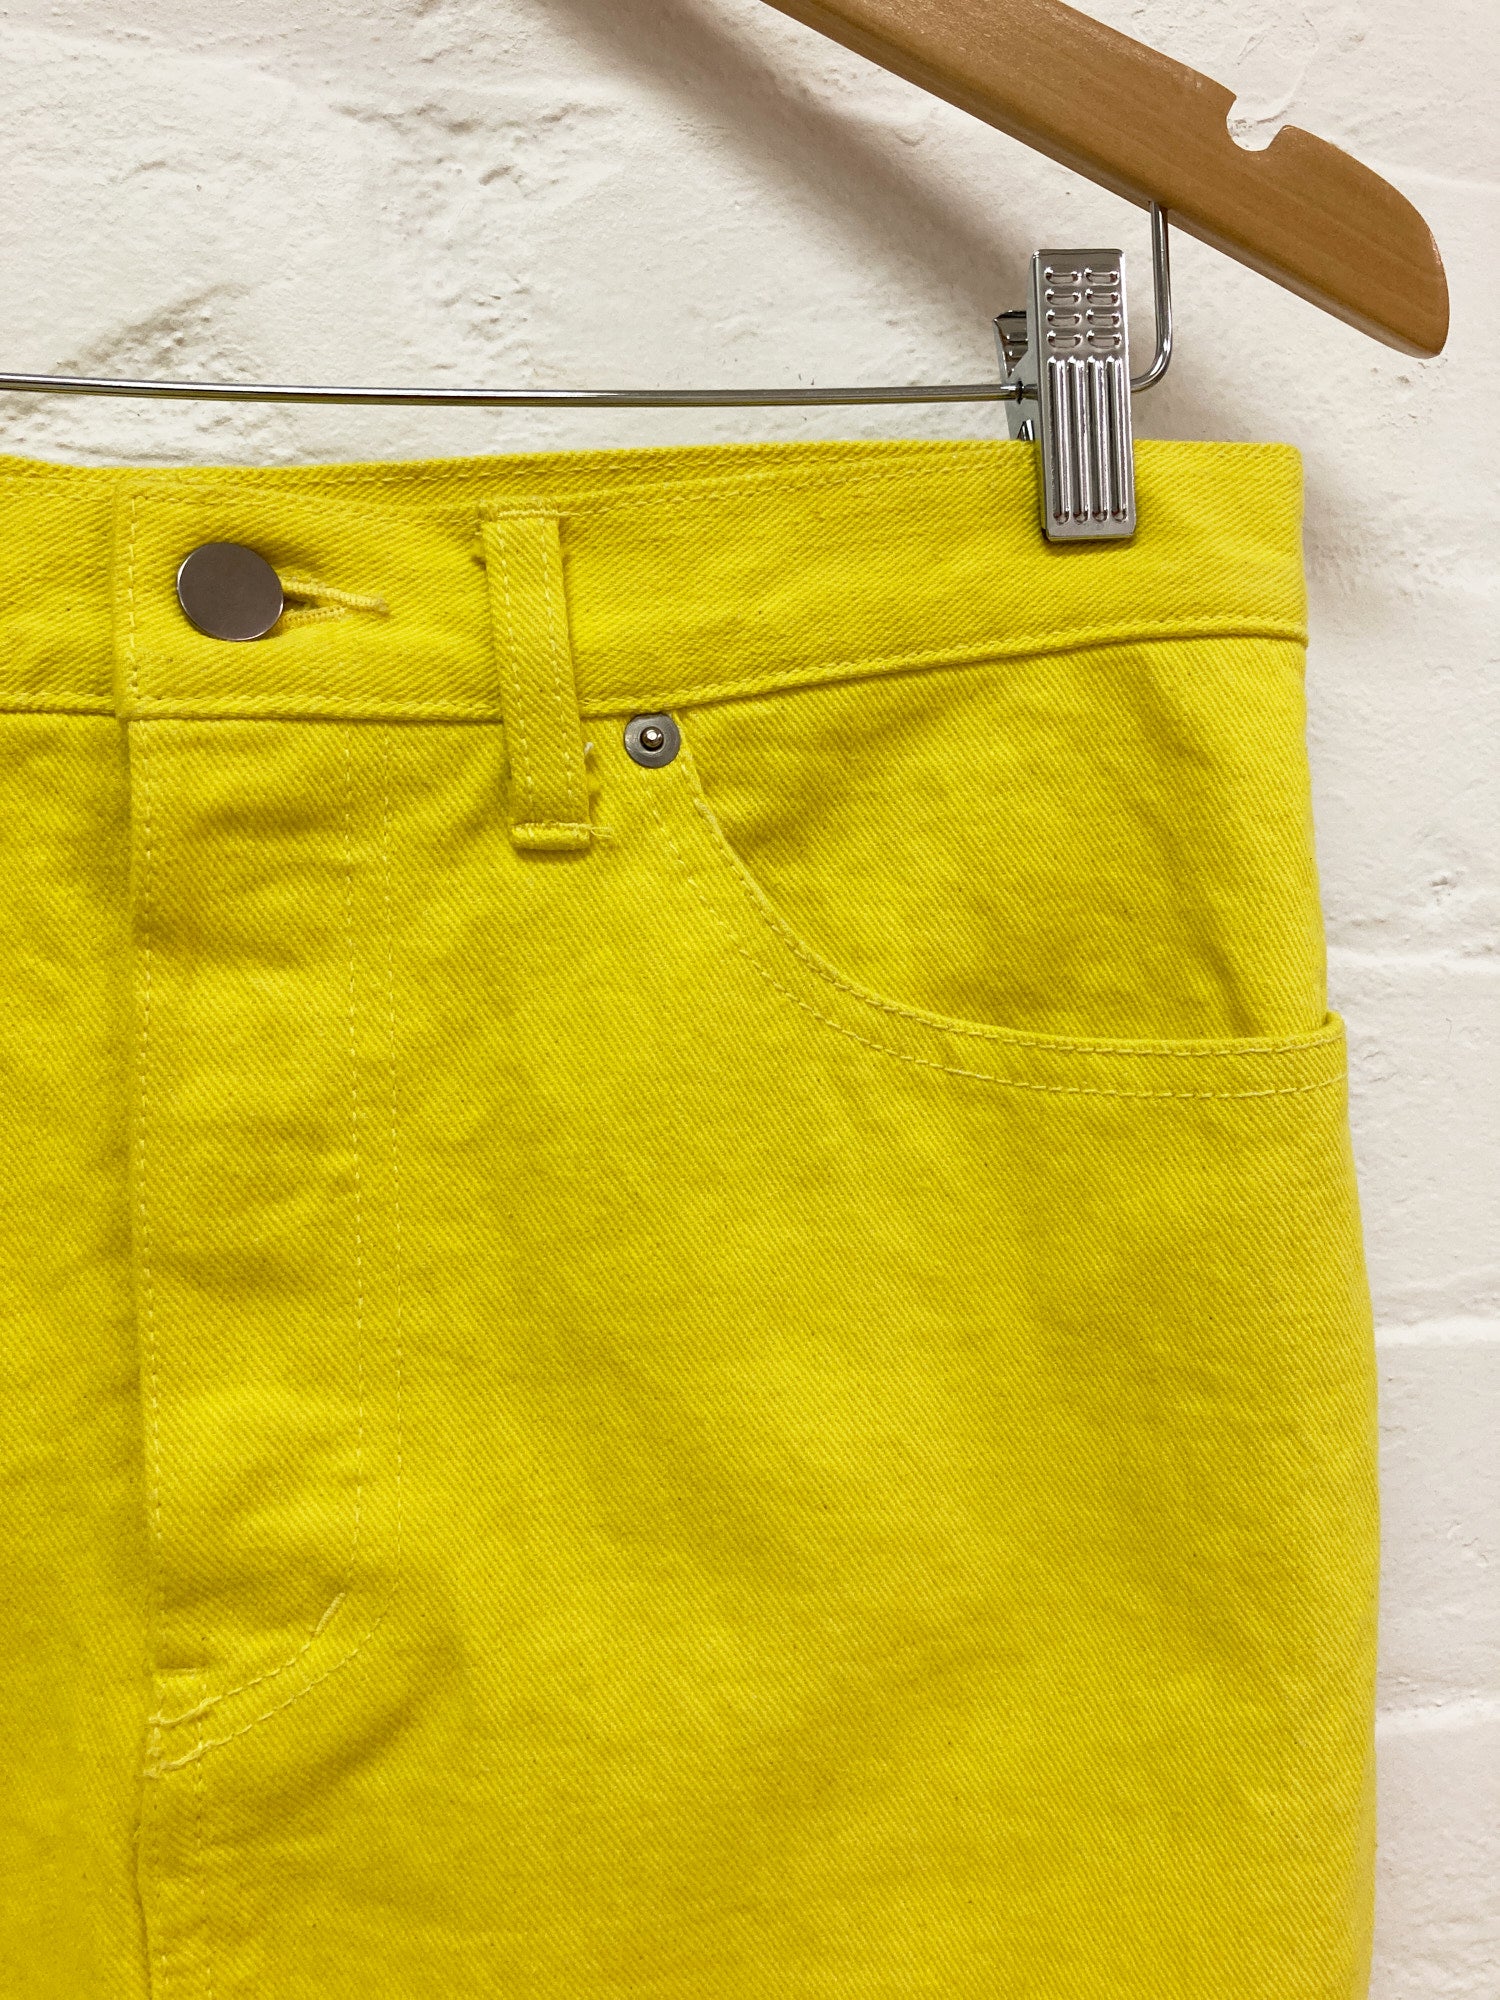 Junya Watanabe Comme des Garcons SS2001 yellow denim skirt with satin back